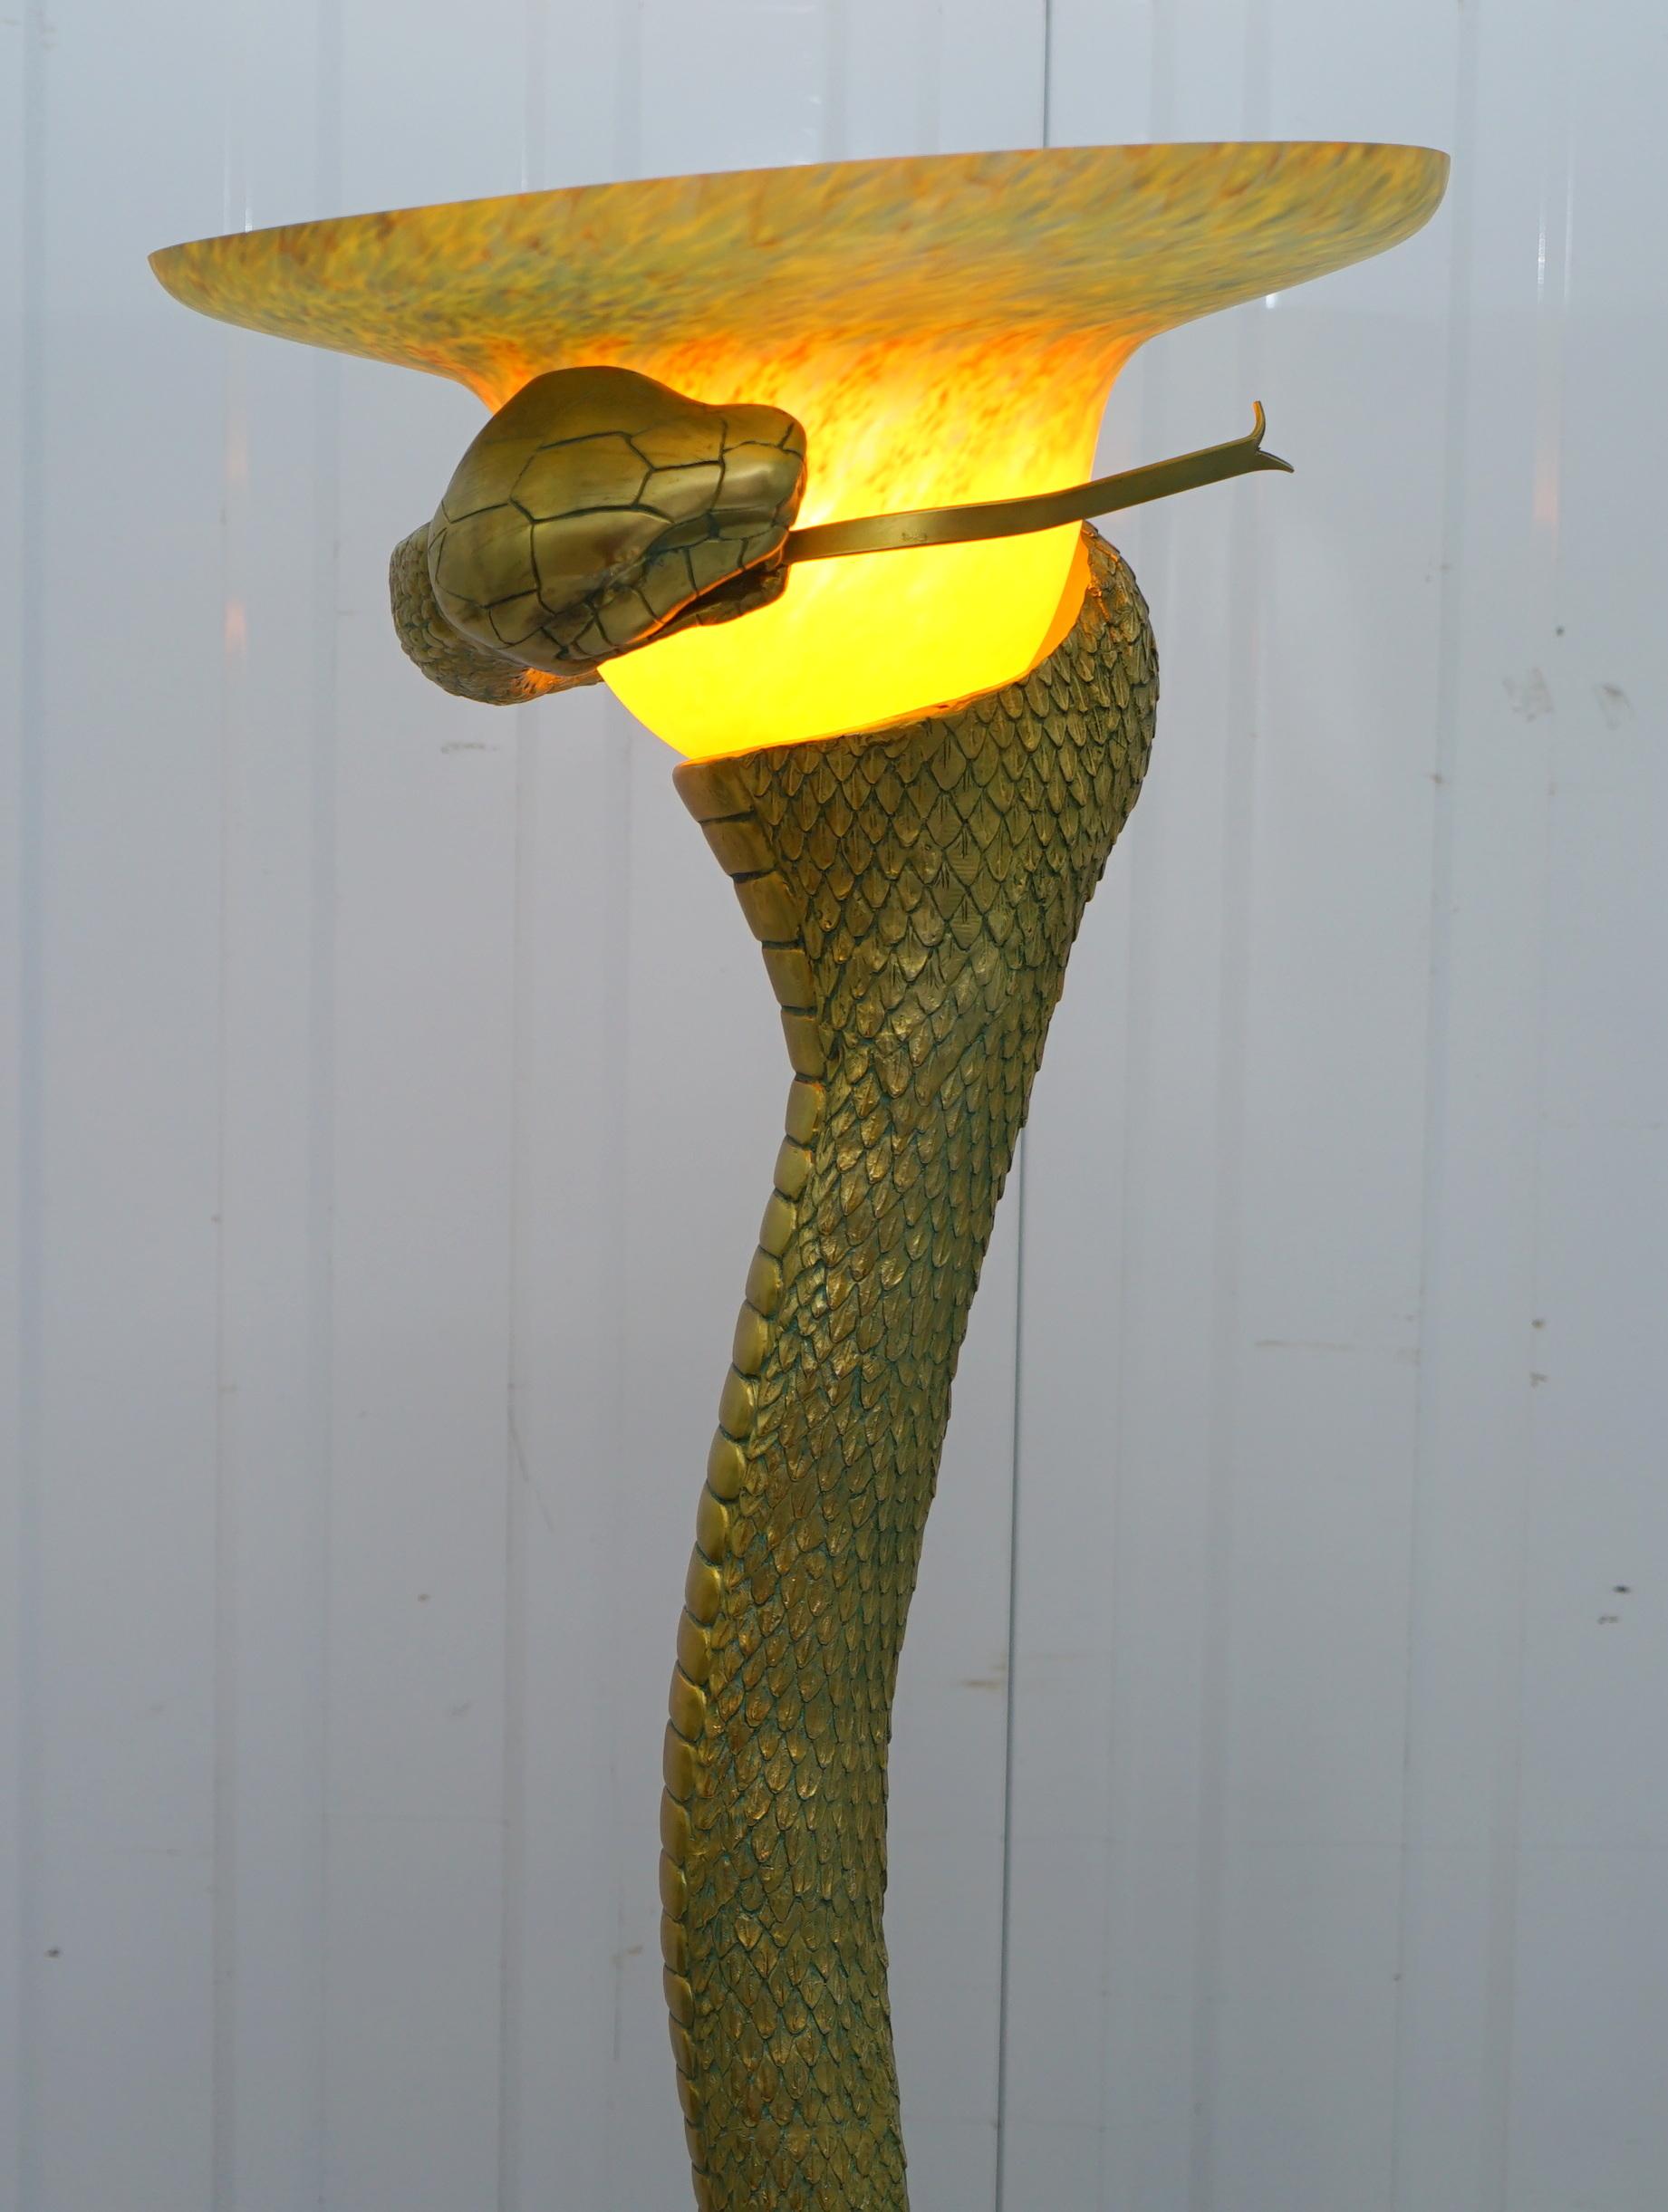 We are delighted to offer for sale this very rare floor standing snake lamp after the original by Edgar Brandt which sold in 1994 at Christies for $76,000

A very good looking and decorative piece, the original sold as above for $76,000 just over